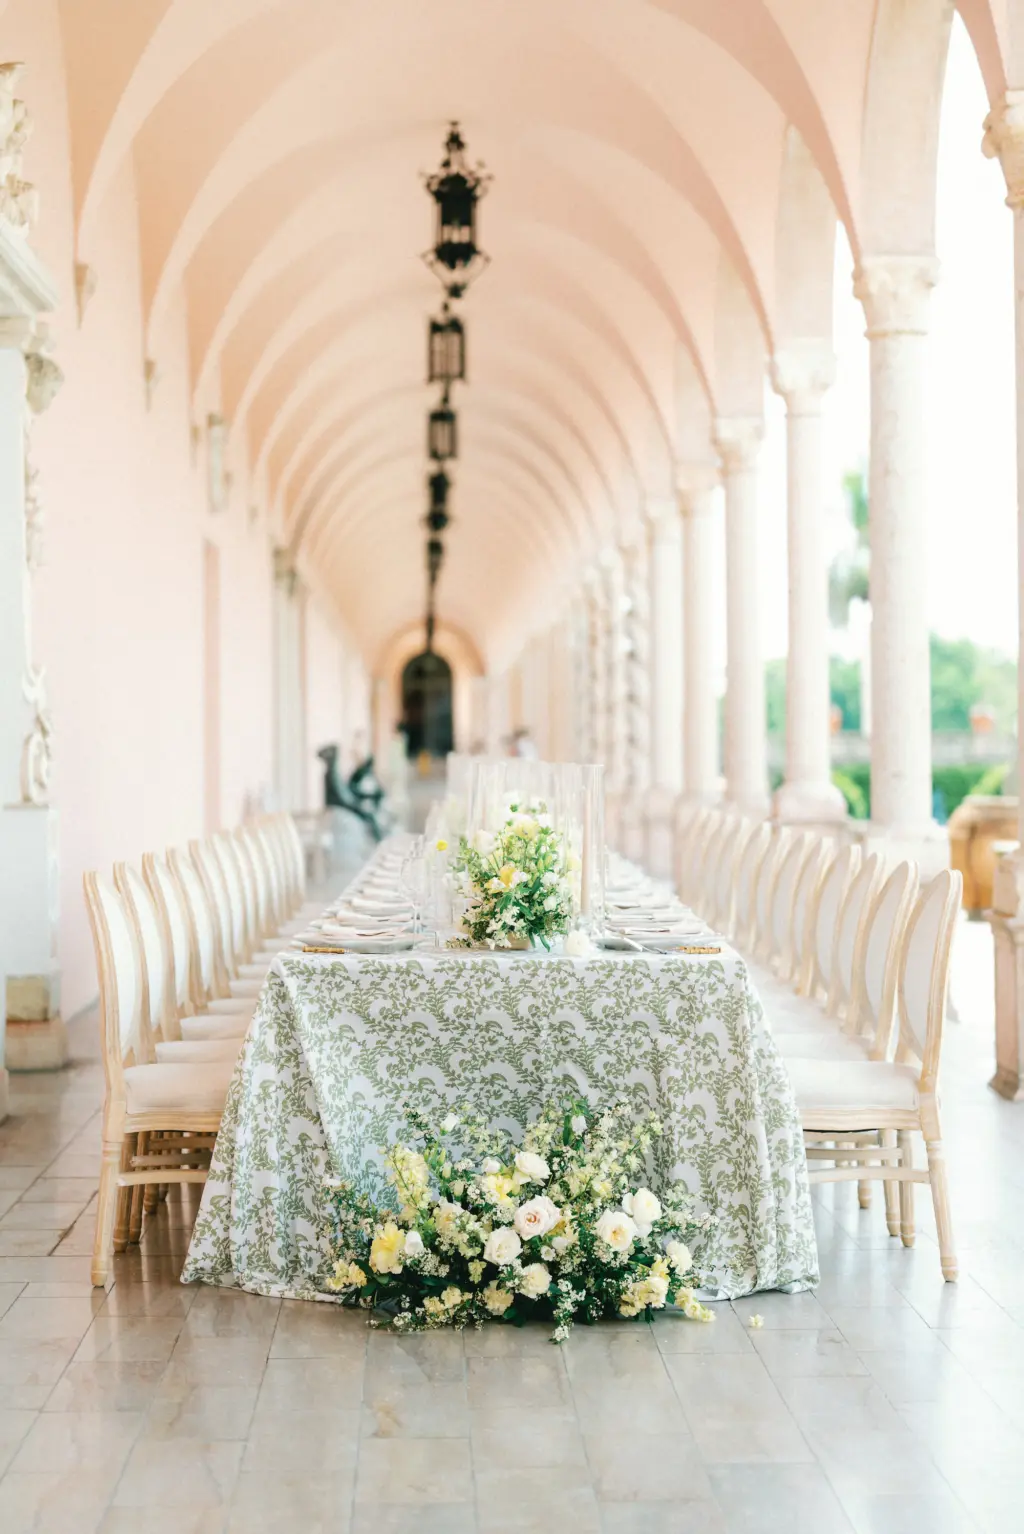 Intimate Italian Outdoor Wedding Reception | Long Feasting Table Inspiration with Damask Table Linen and Louis Chairs | Sarasota Venue The Ringling Museum and Gardens